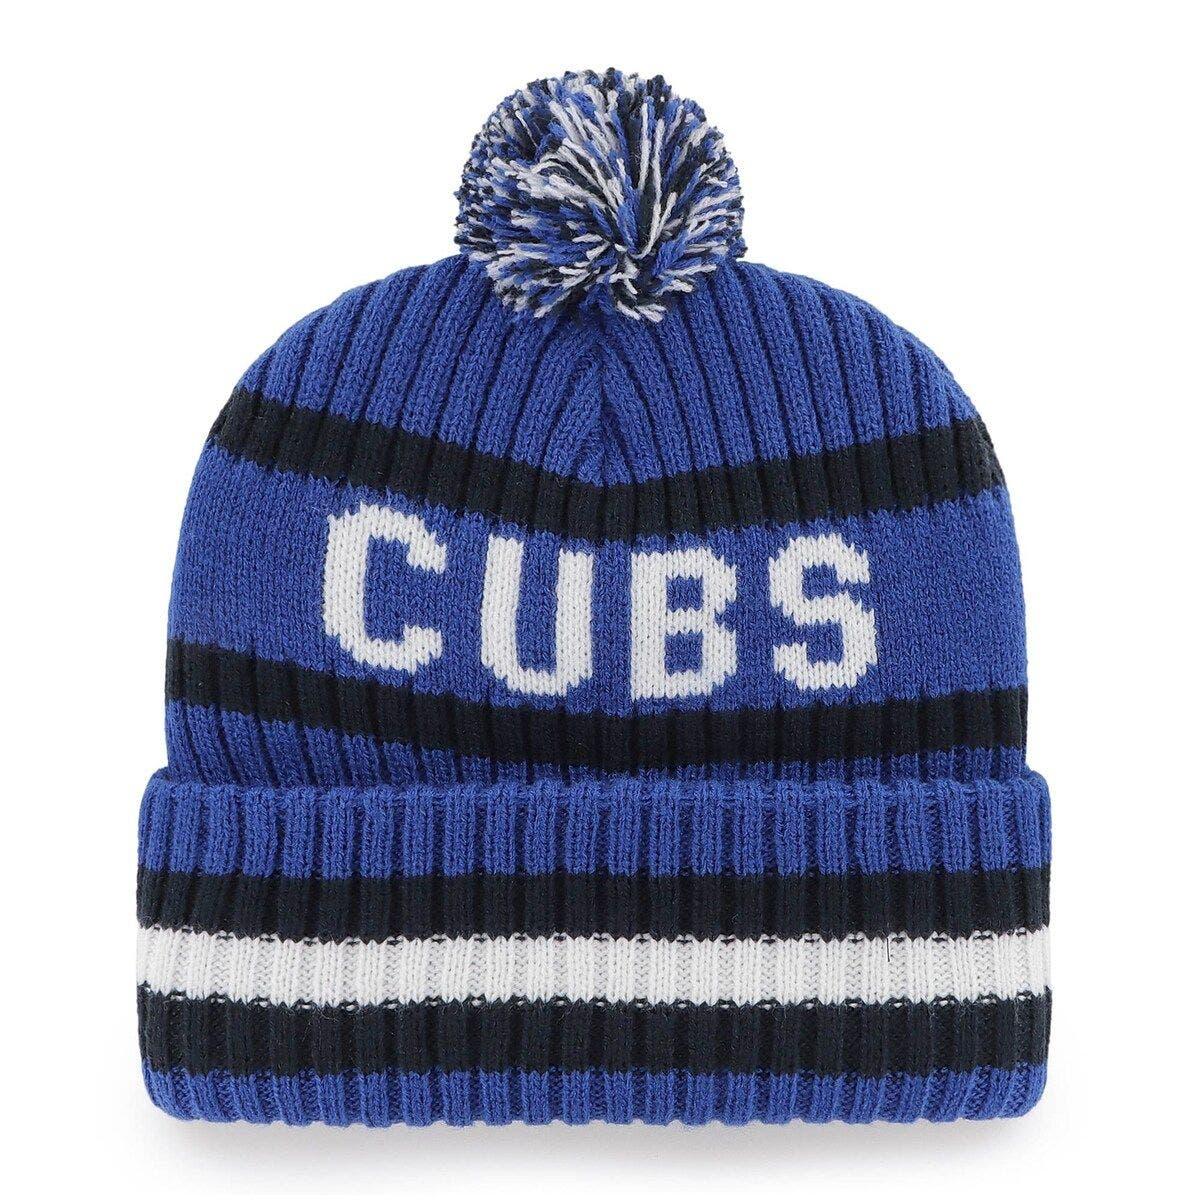 NEW Detroit Tigers with old English D, Knit Cuffed Beanie, Color